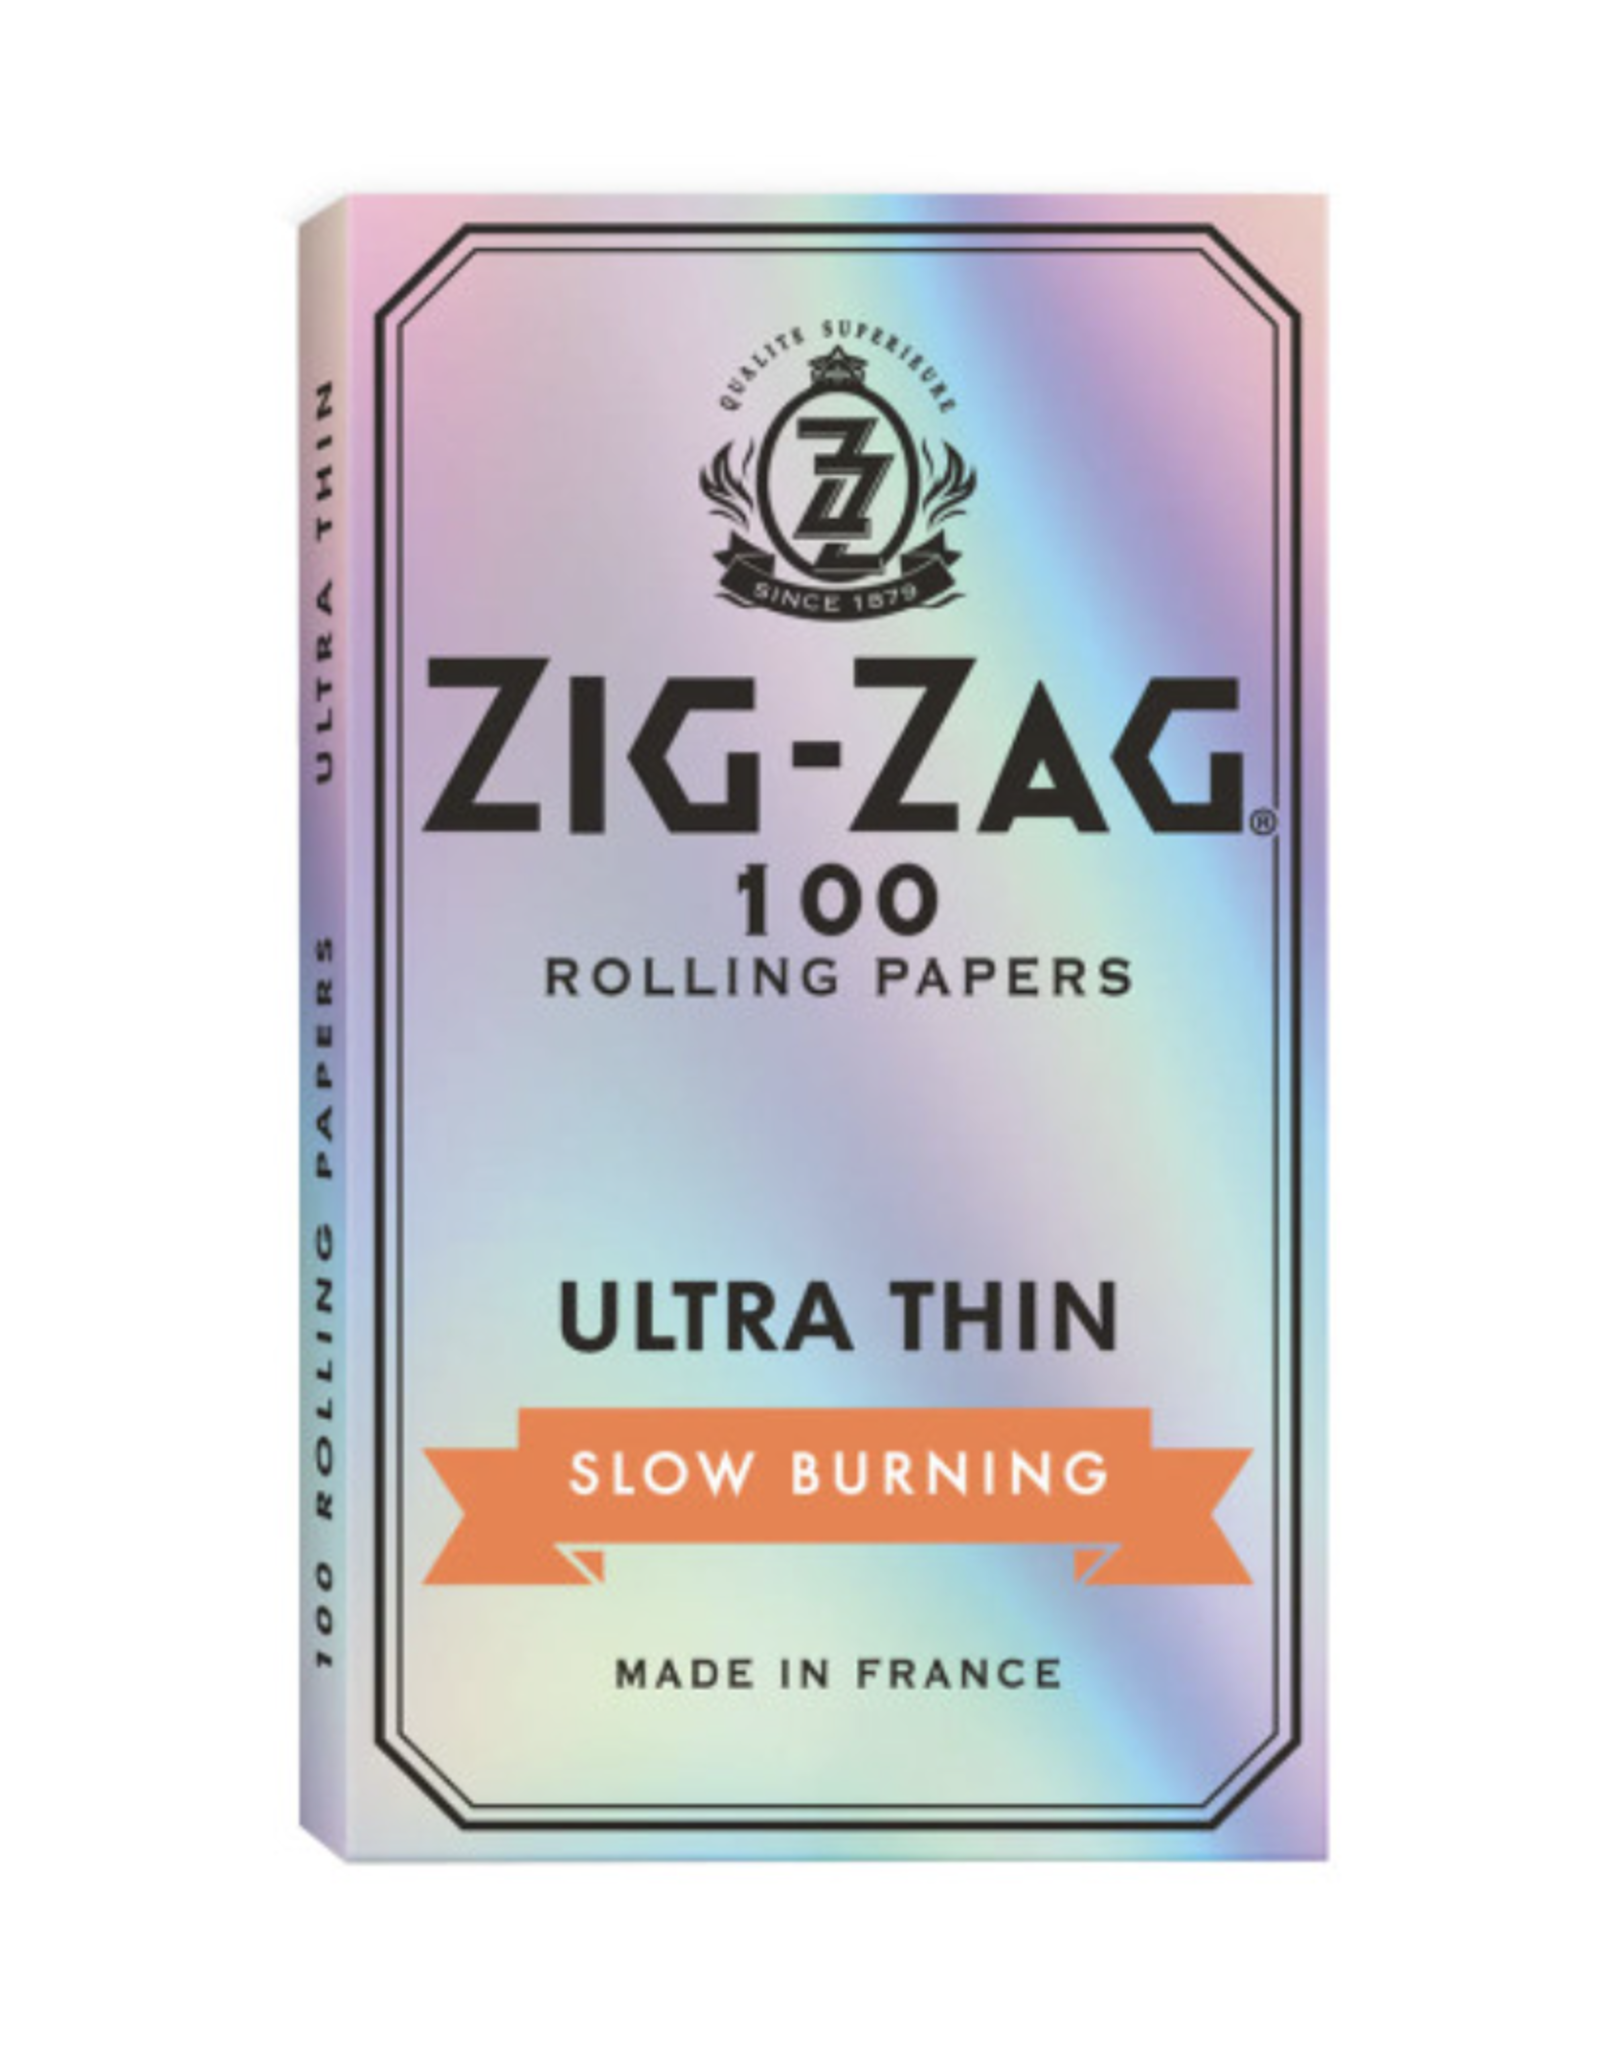 Zig-Zag Ultra Thin Papers